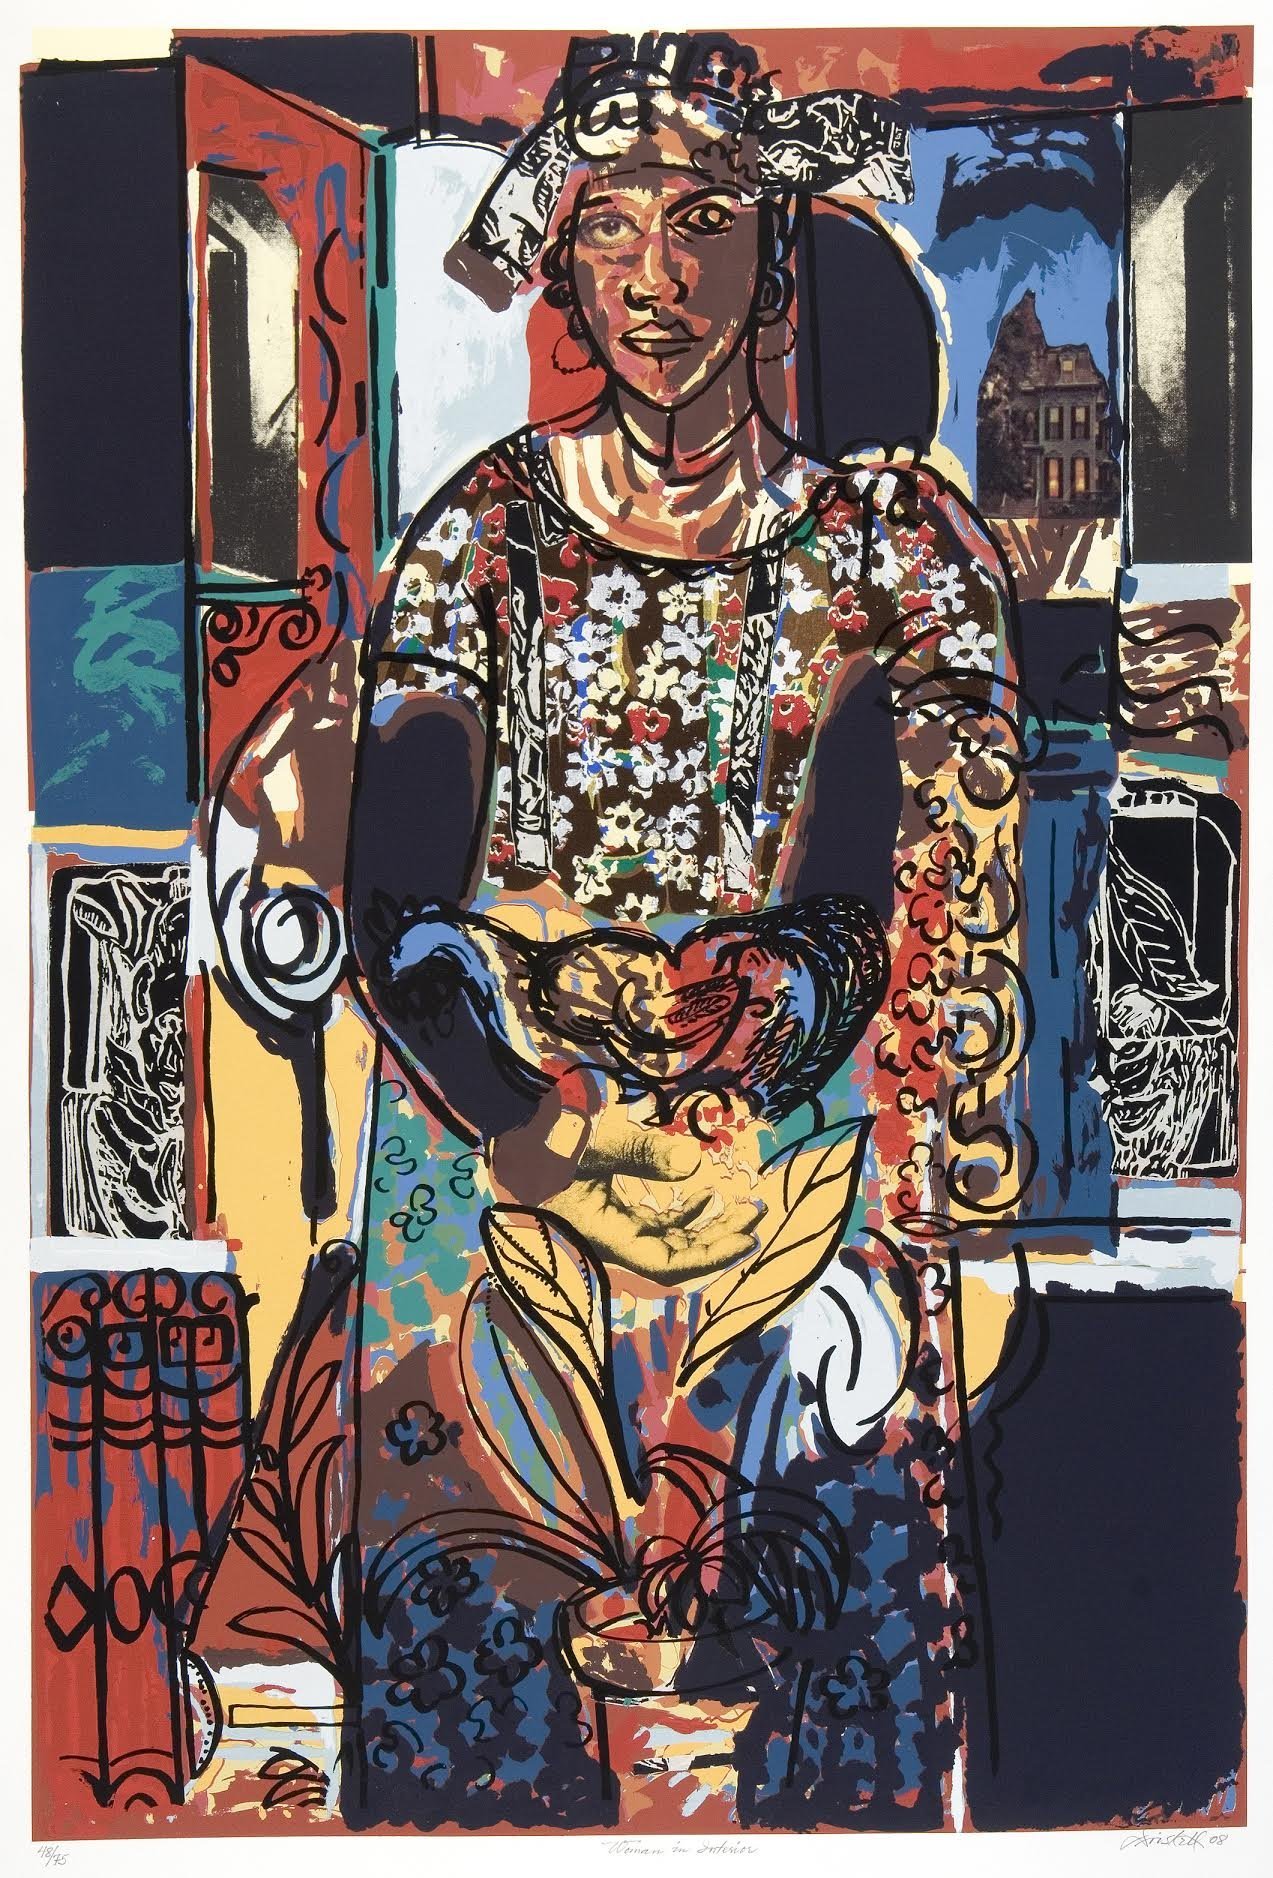 Woman in Interior, 2008, screenprint on Rives BFK woven paper